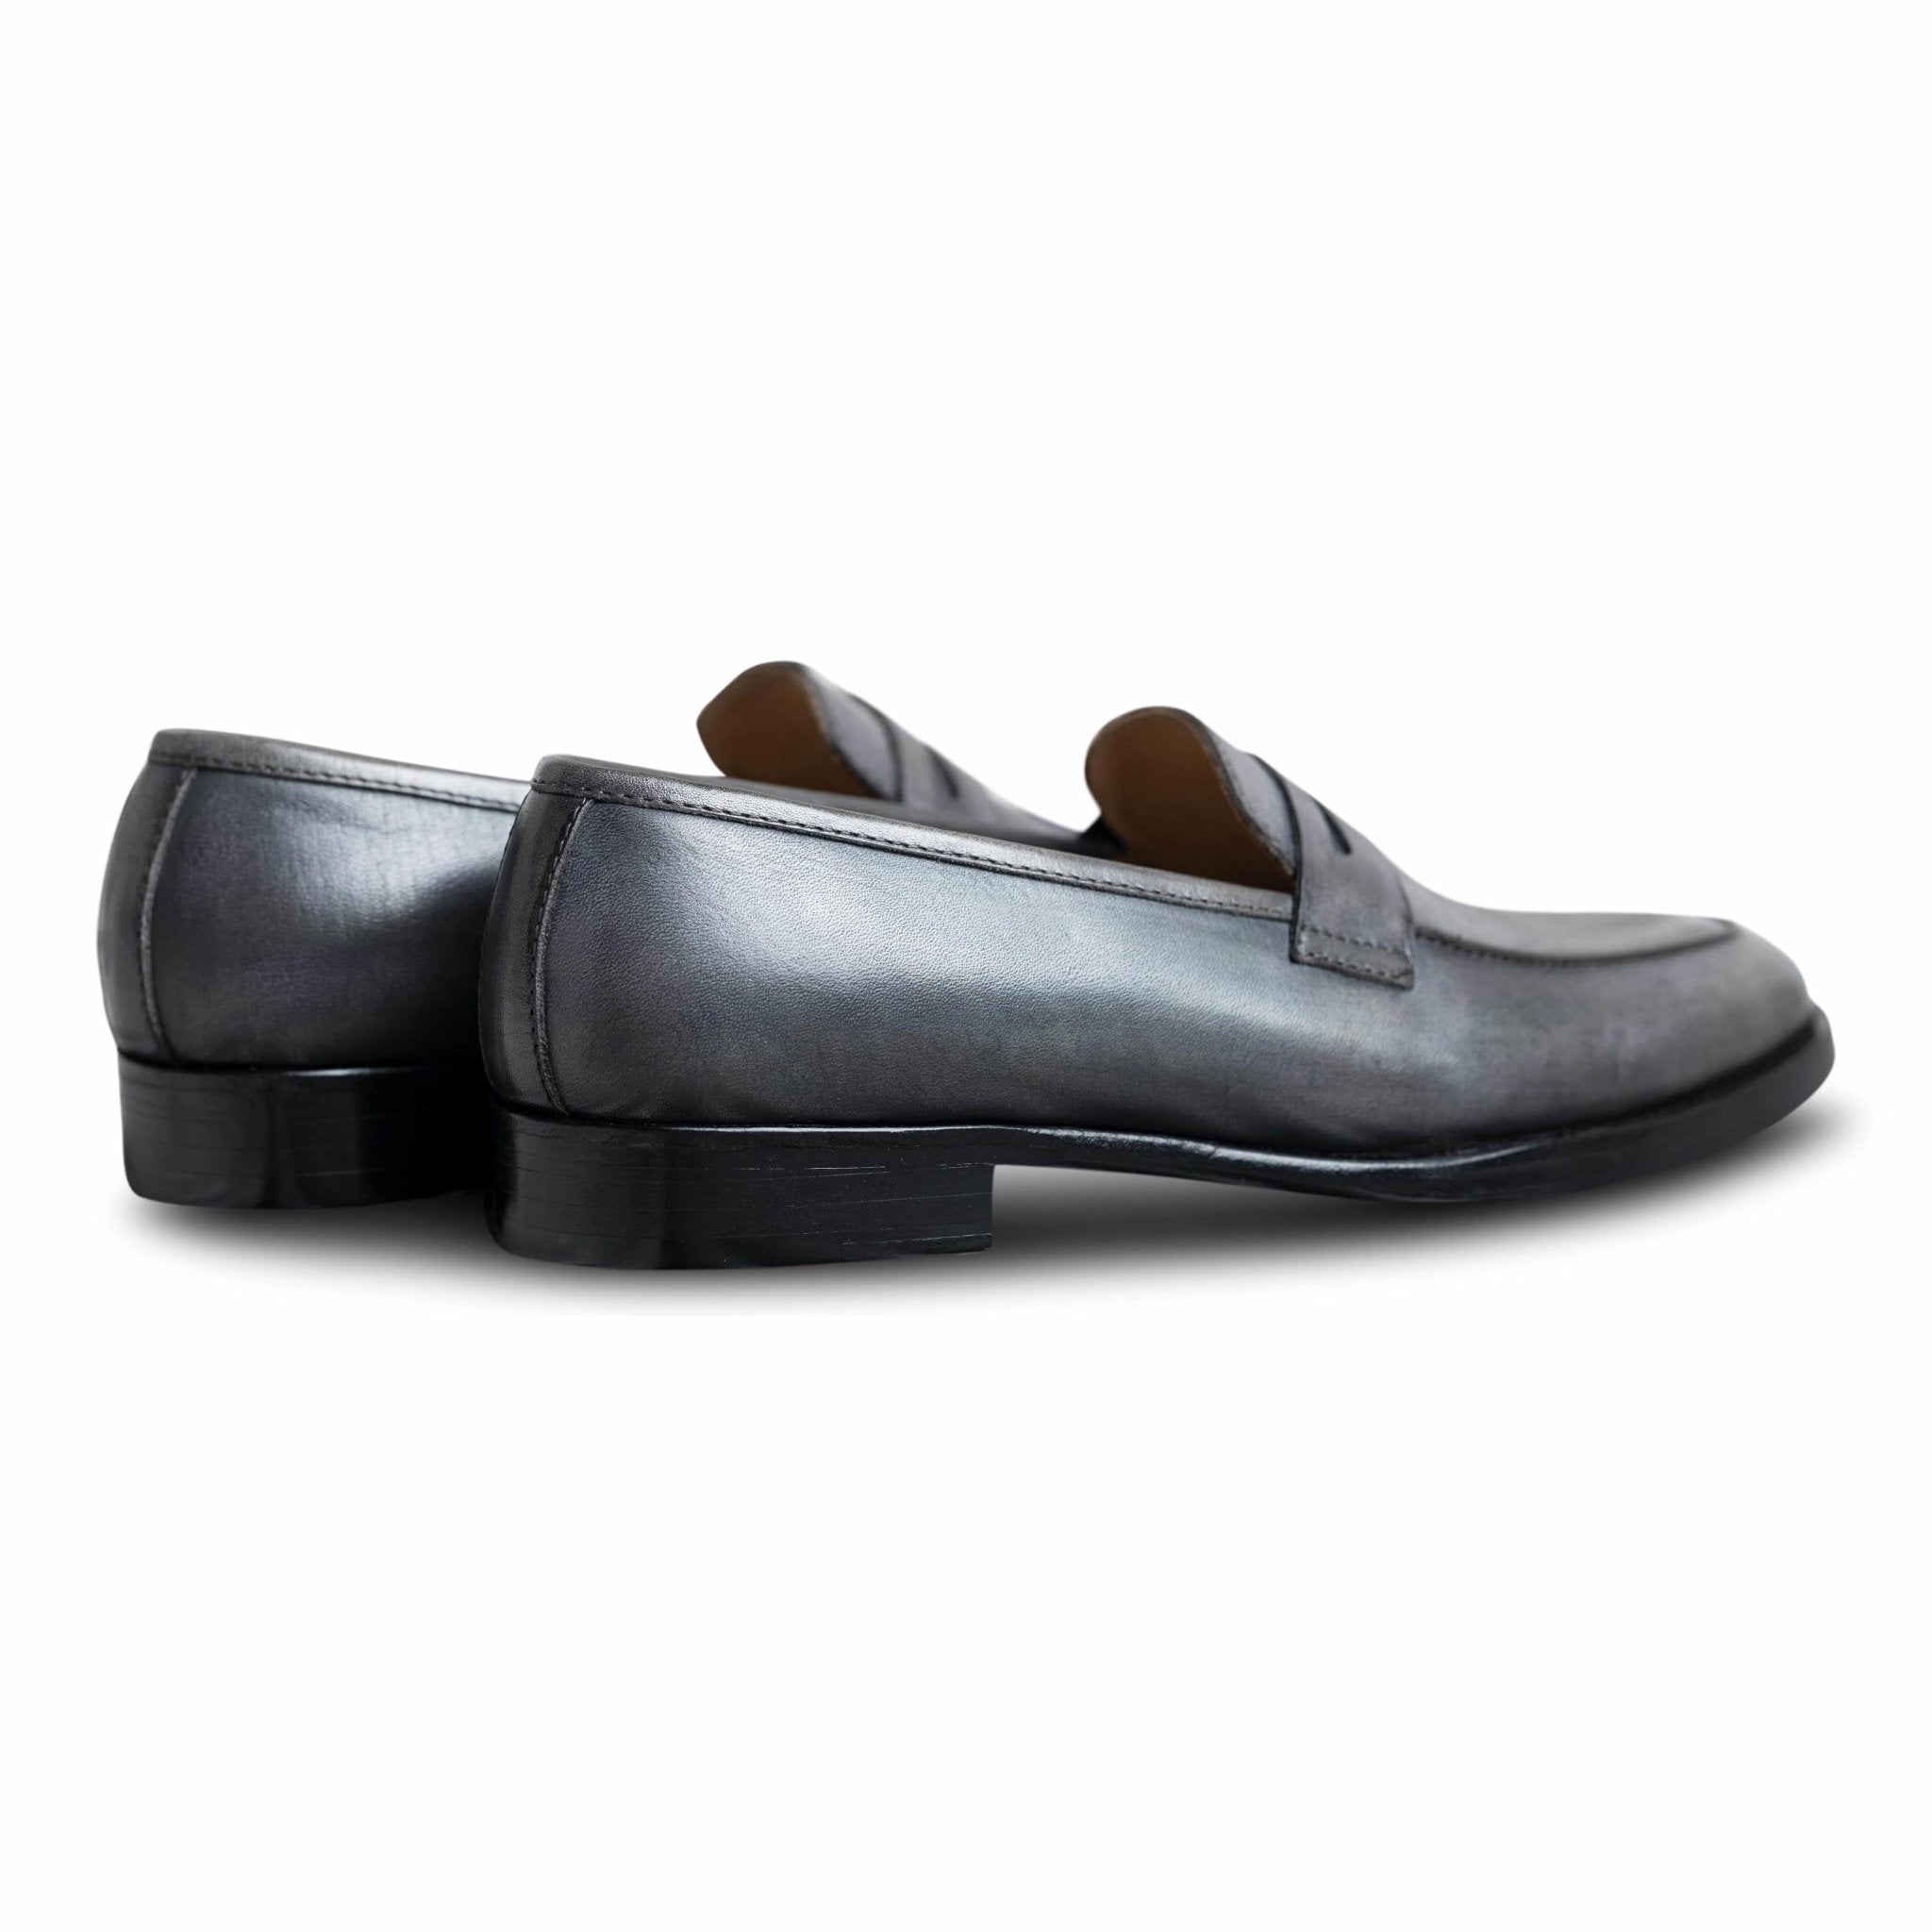 Penno Grego - dmodot Shoes